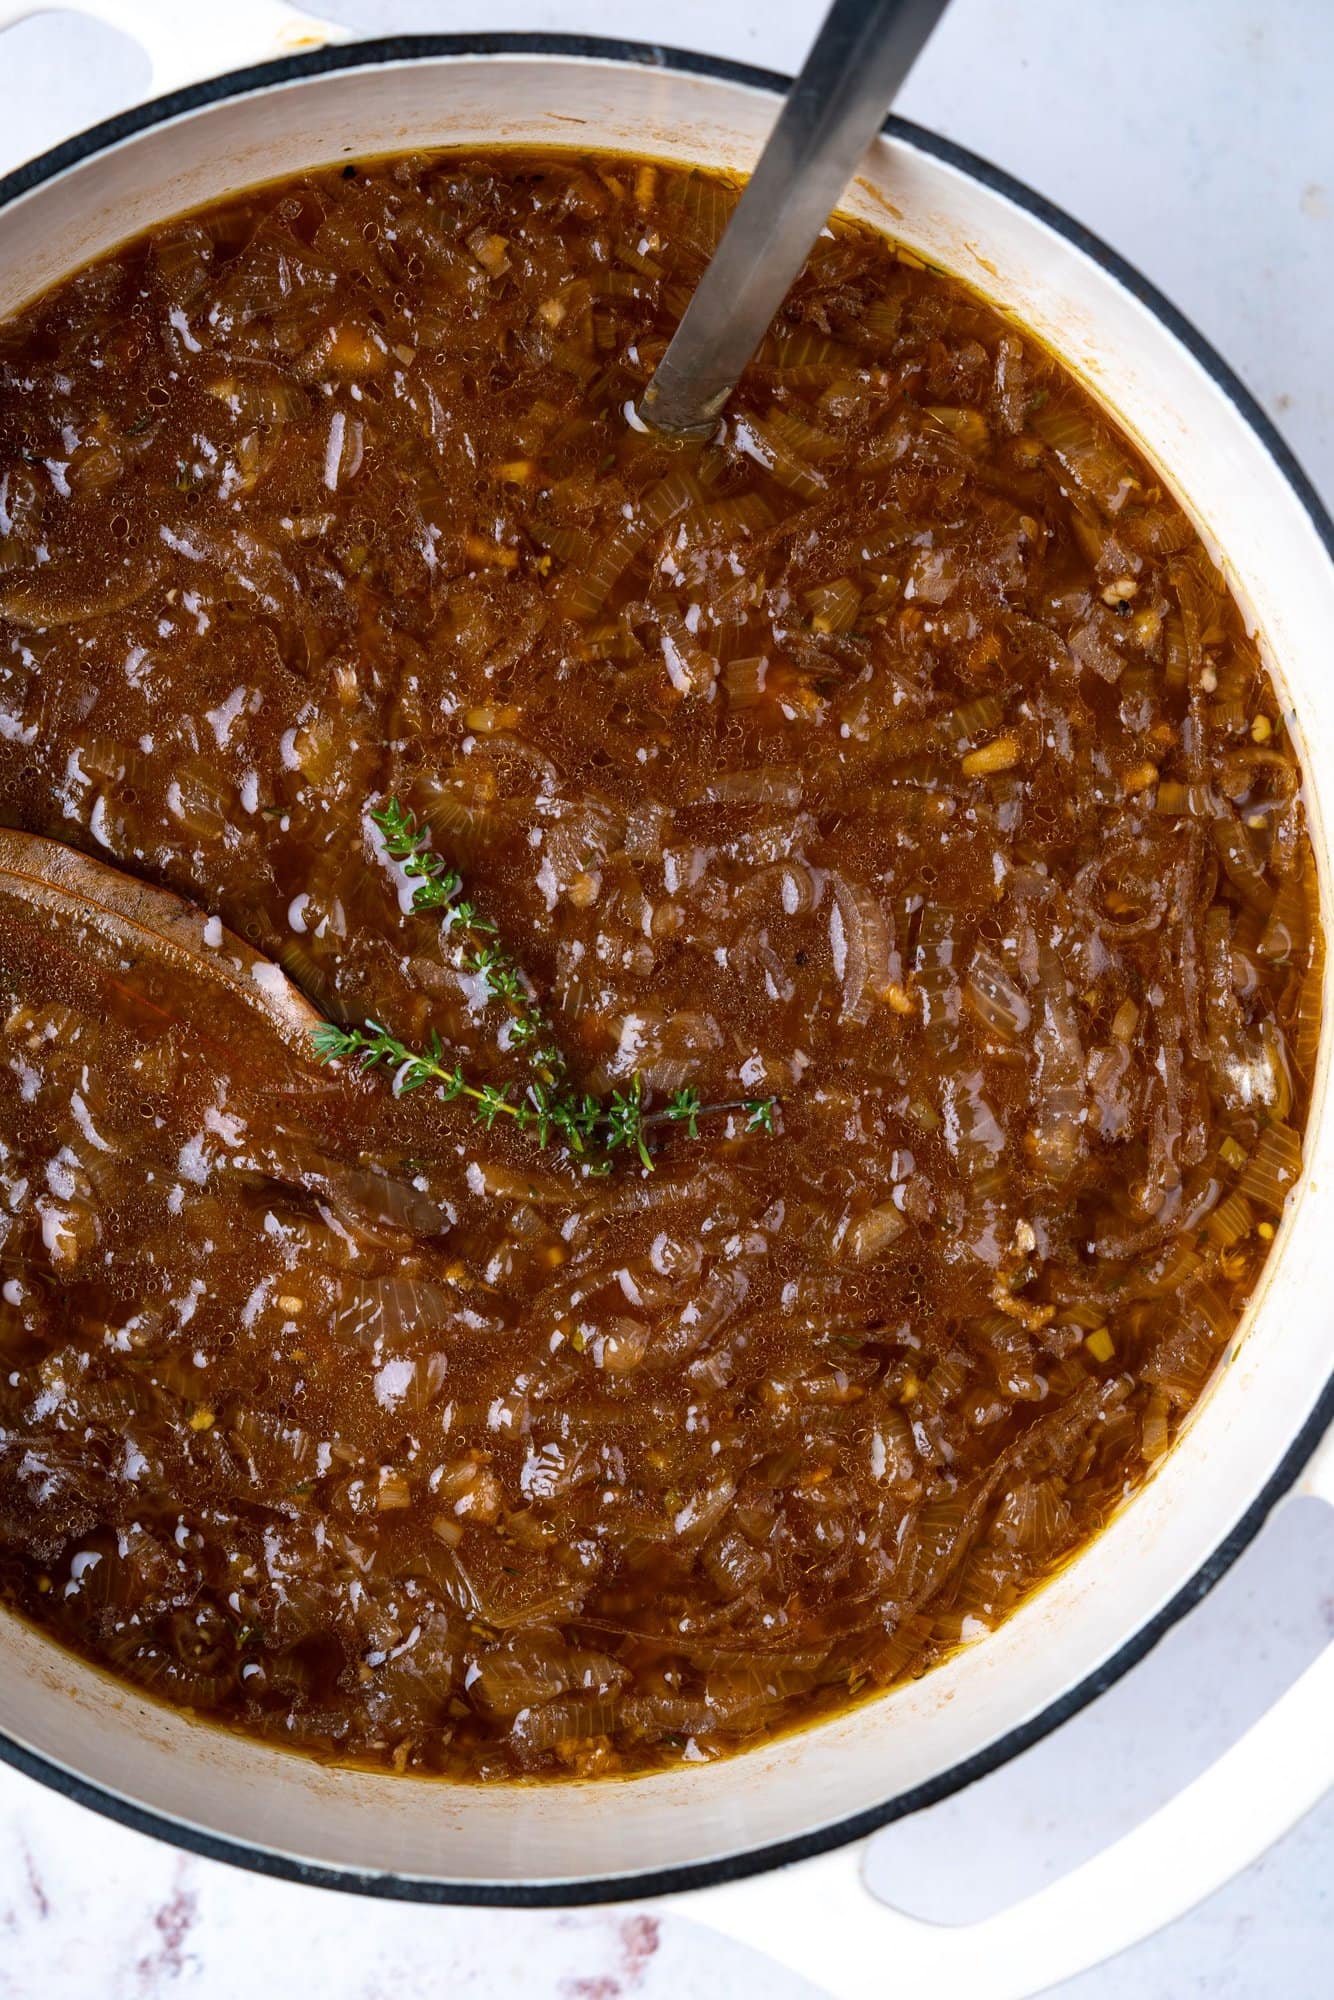 thyme on a bed of dark-brown color caramelized onions of french onion soup